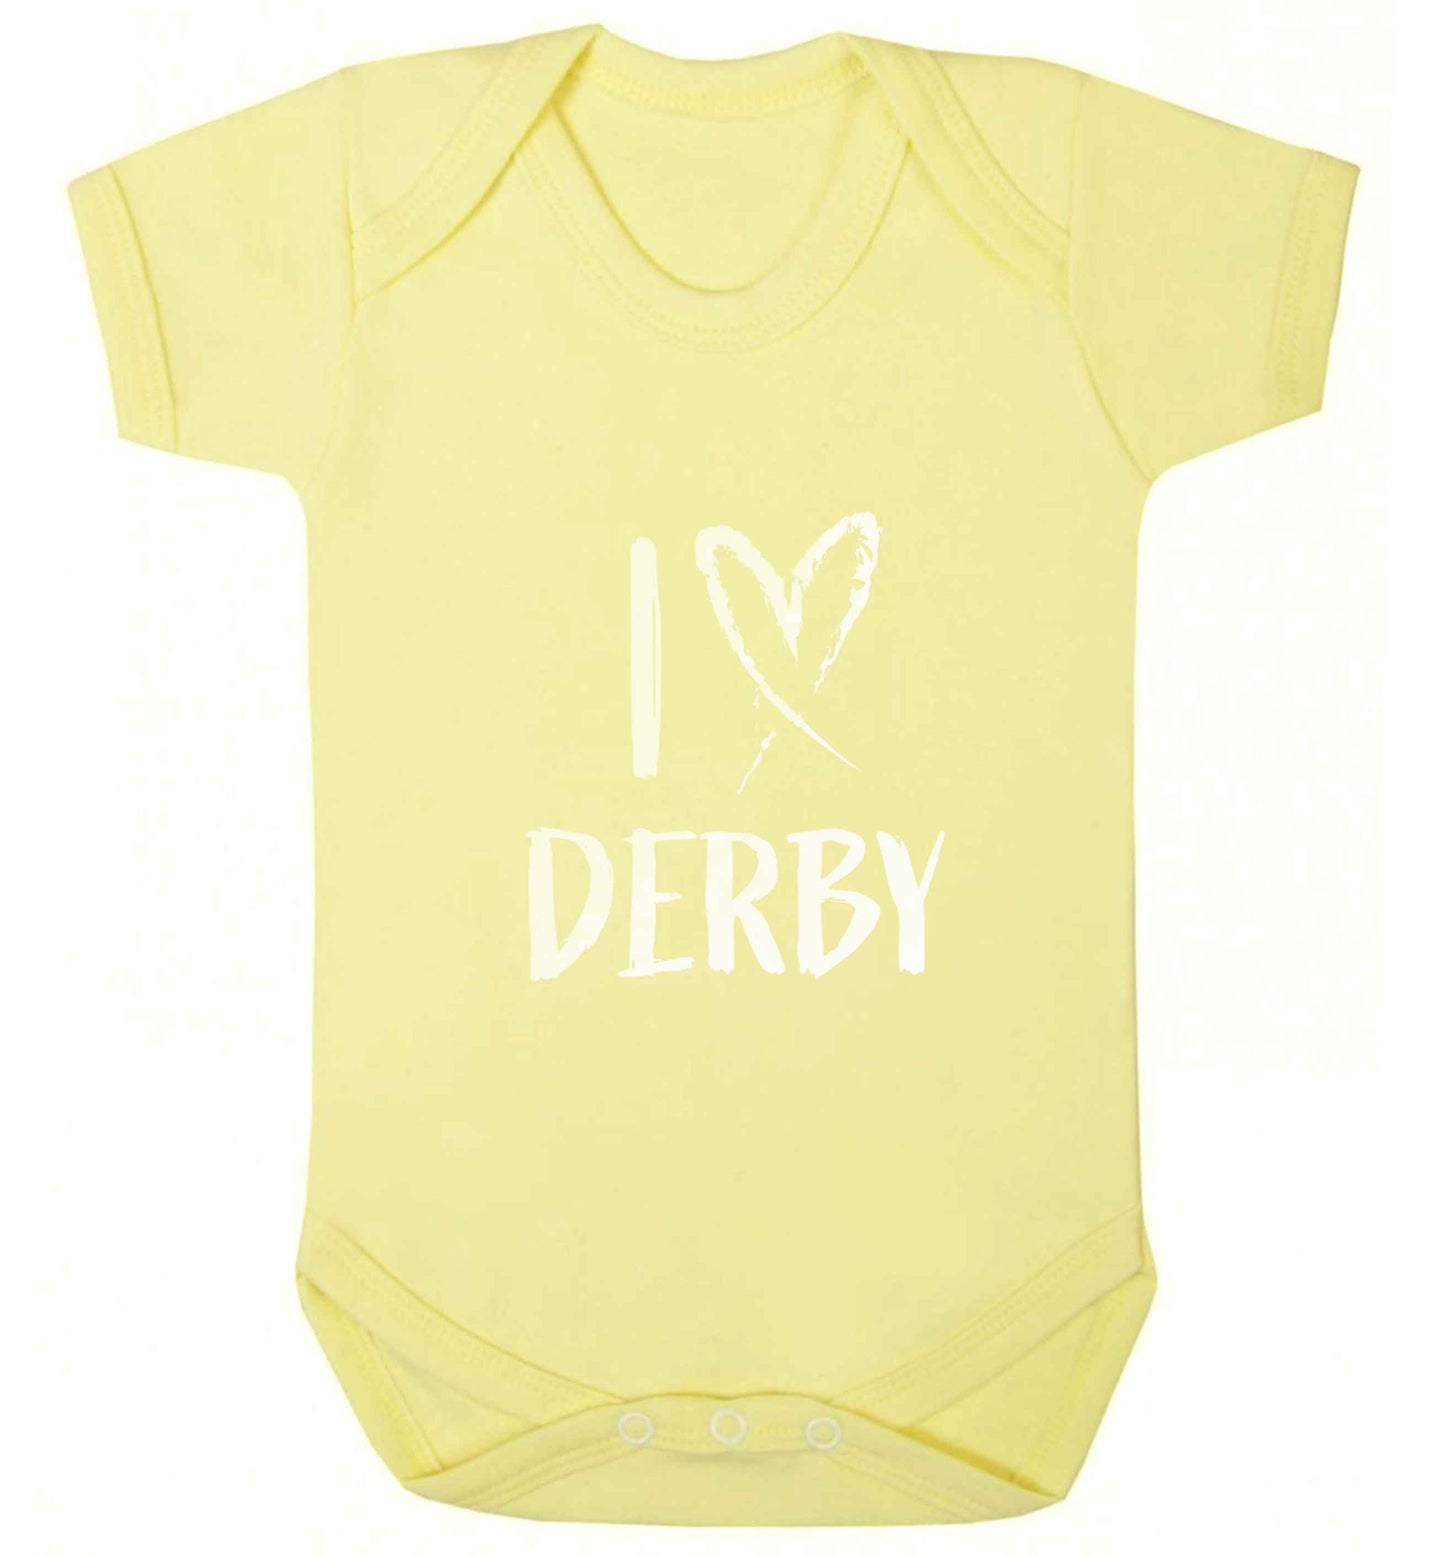 I love Derby baby vest pale yellow 18-24 months